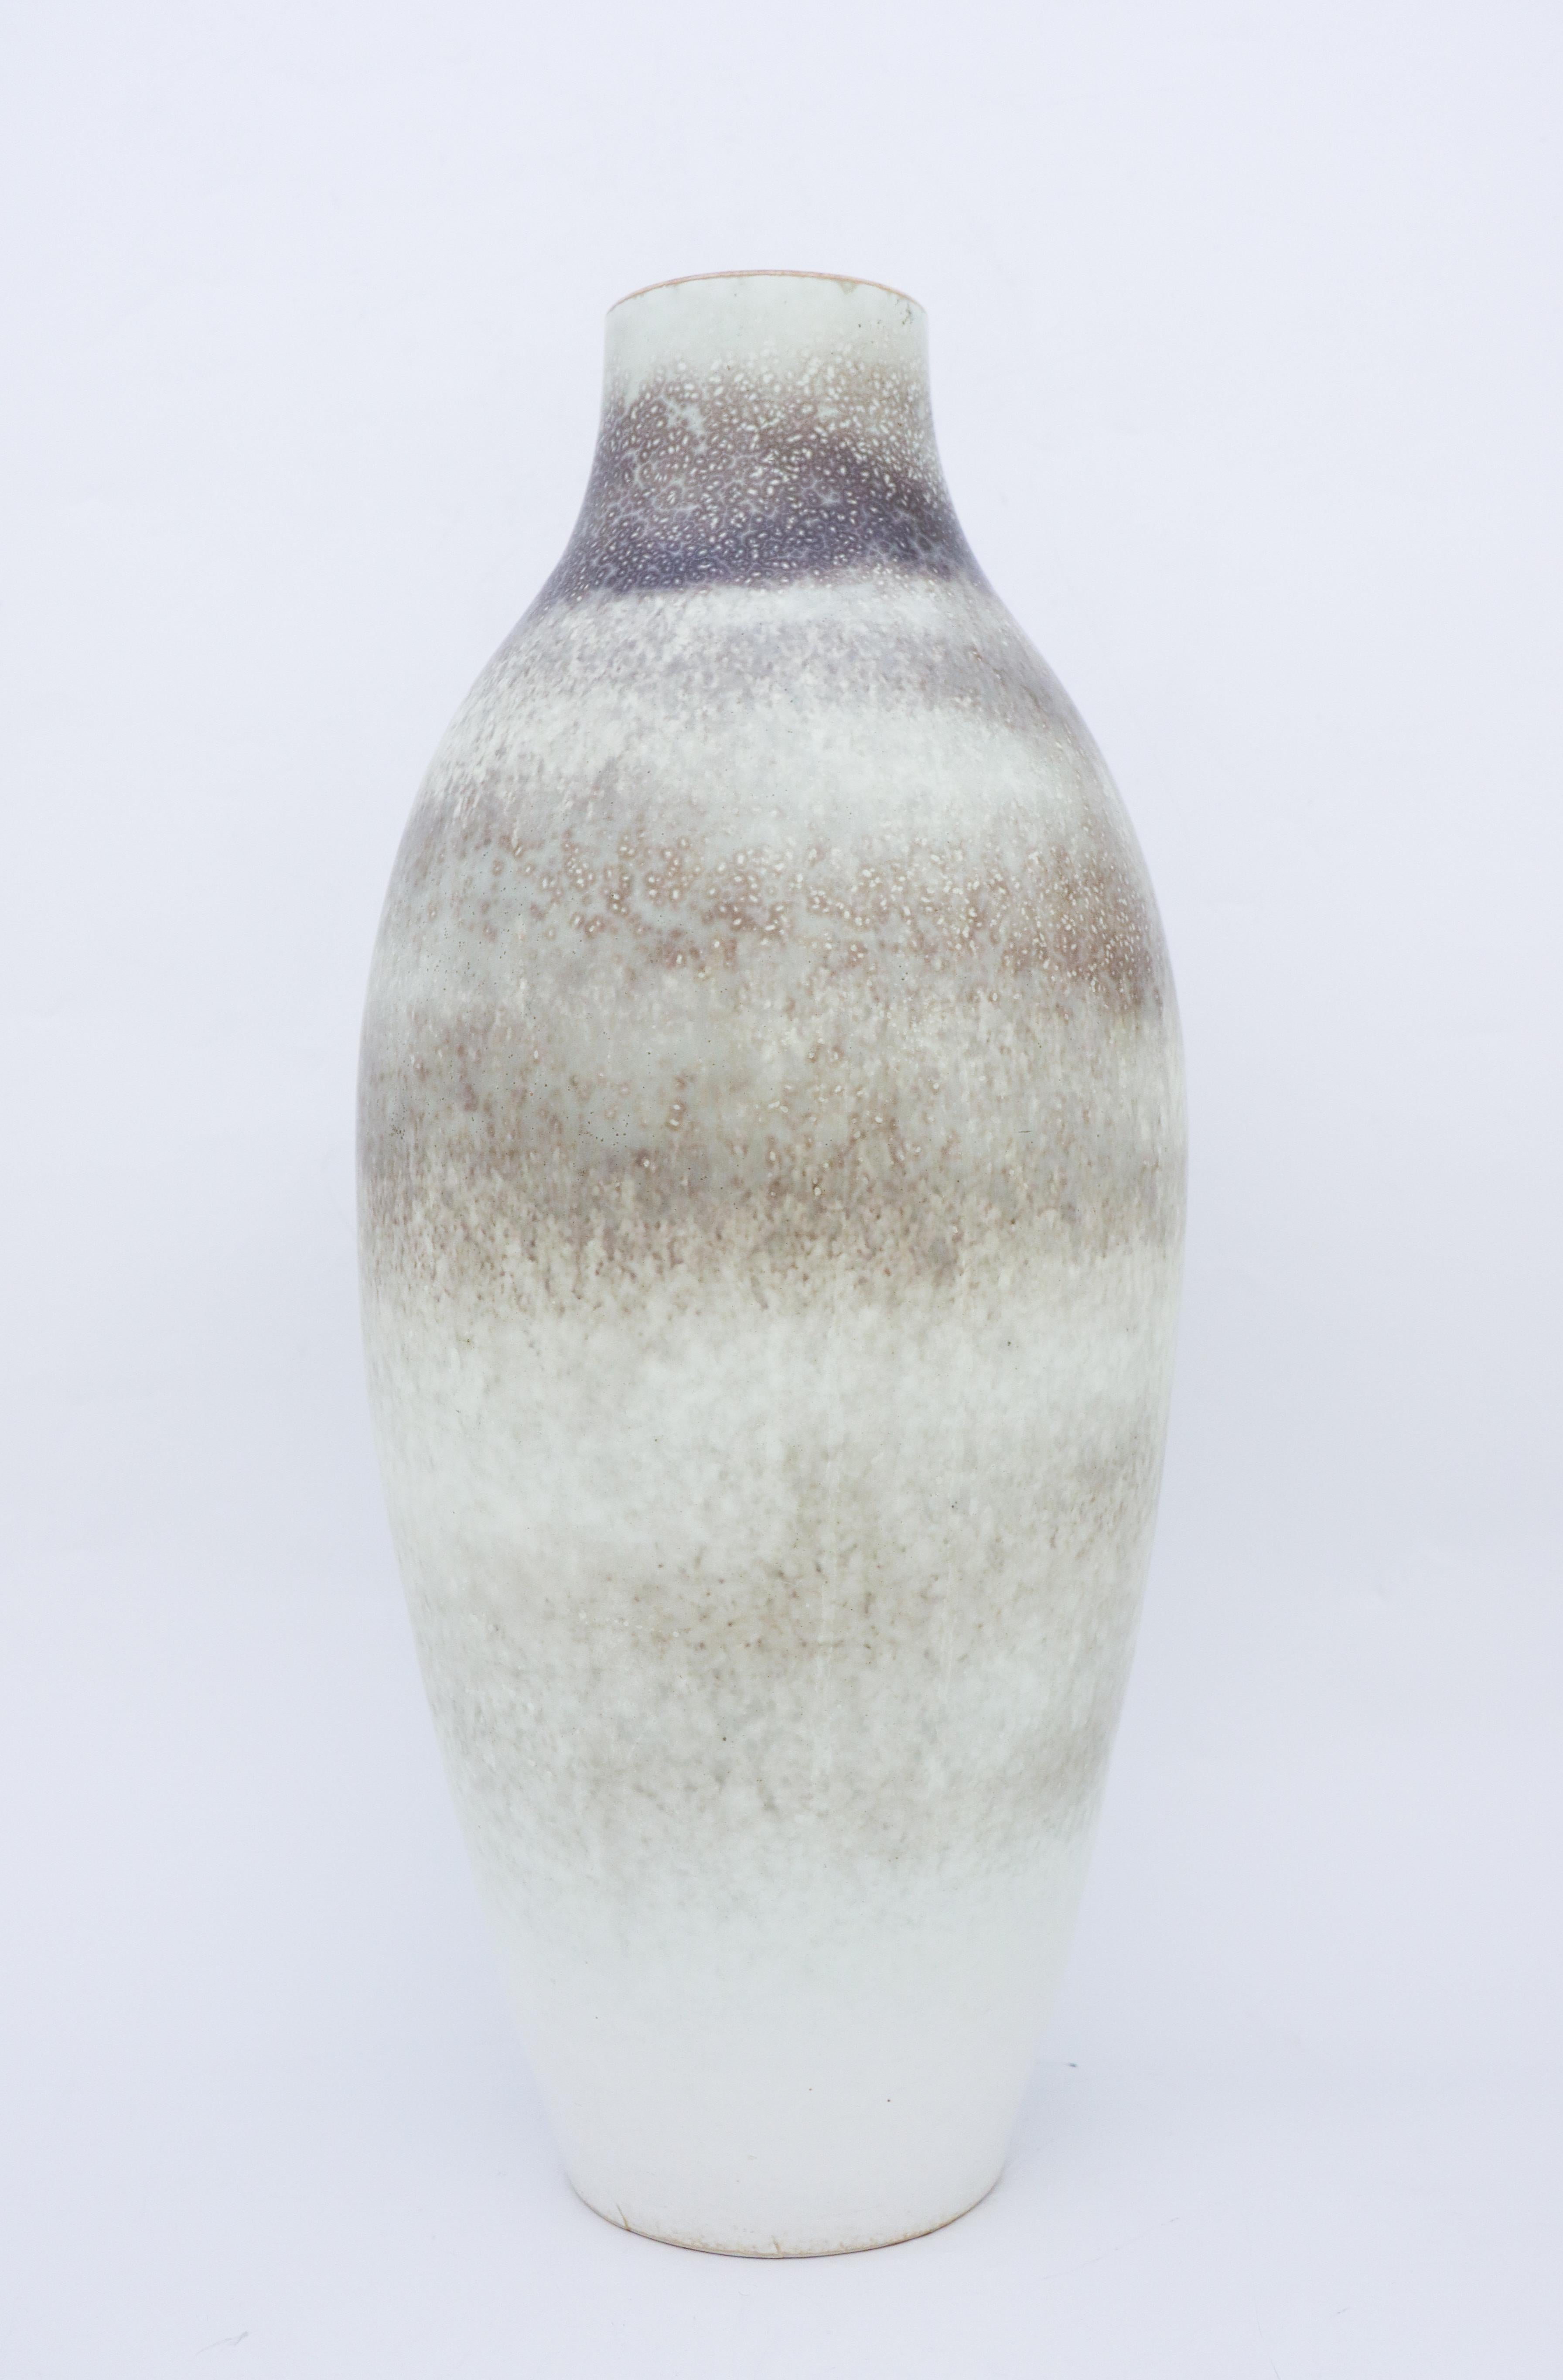 A Large vase by Carl-Harry Stålhane with a beautiful grey speckled glaze. It is made in the 1950s. The vase is marked as 2nd quality because of the small cracks in the ceramics at the base, it also have two minor brown marks in the glaze. Except